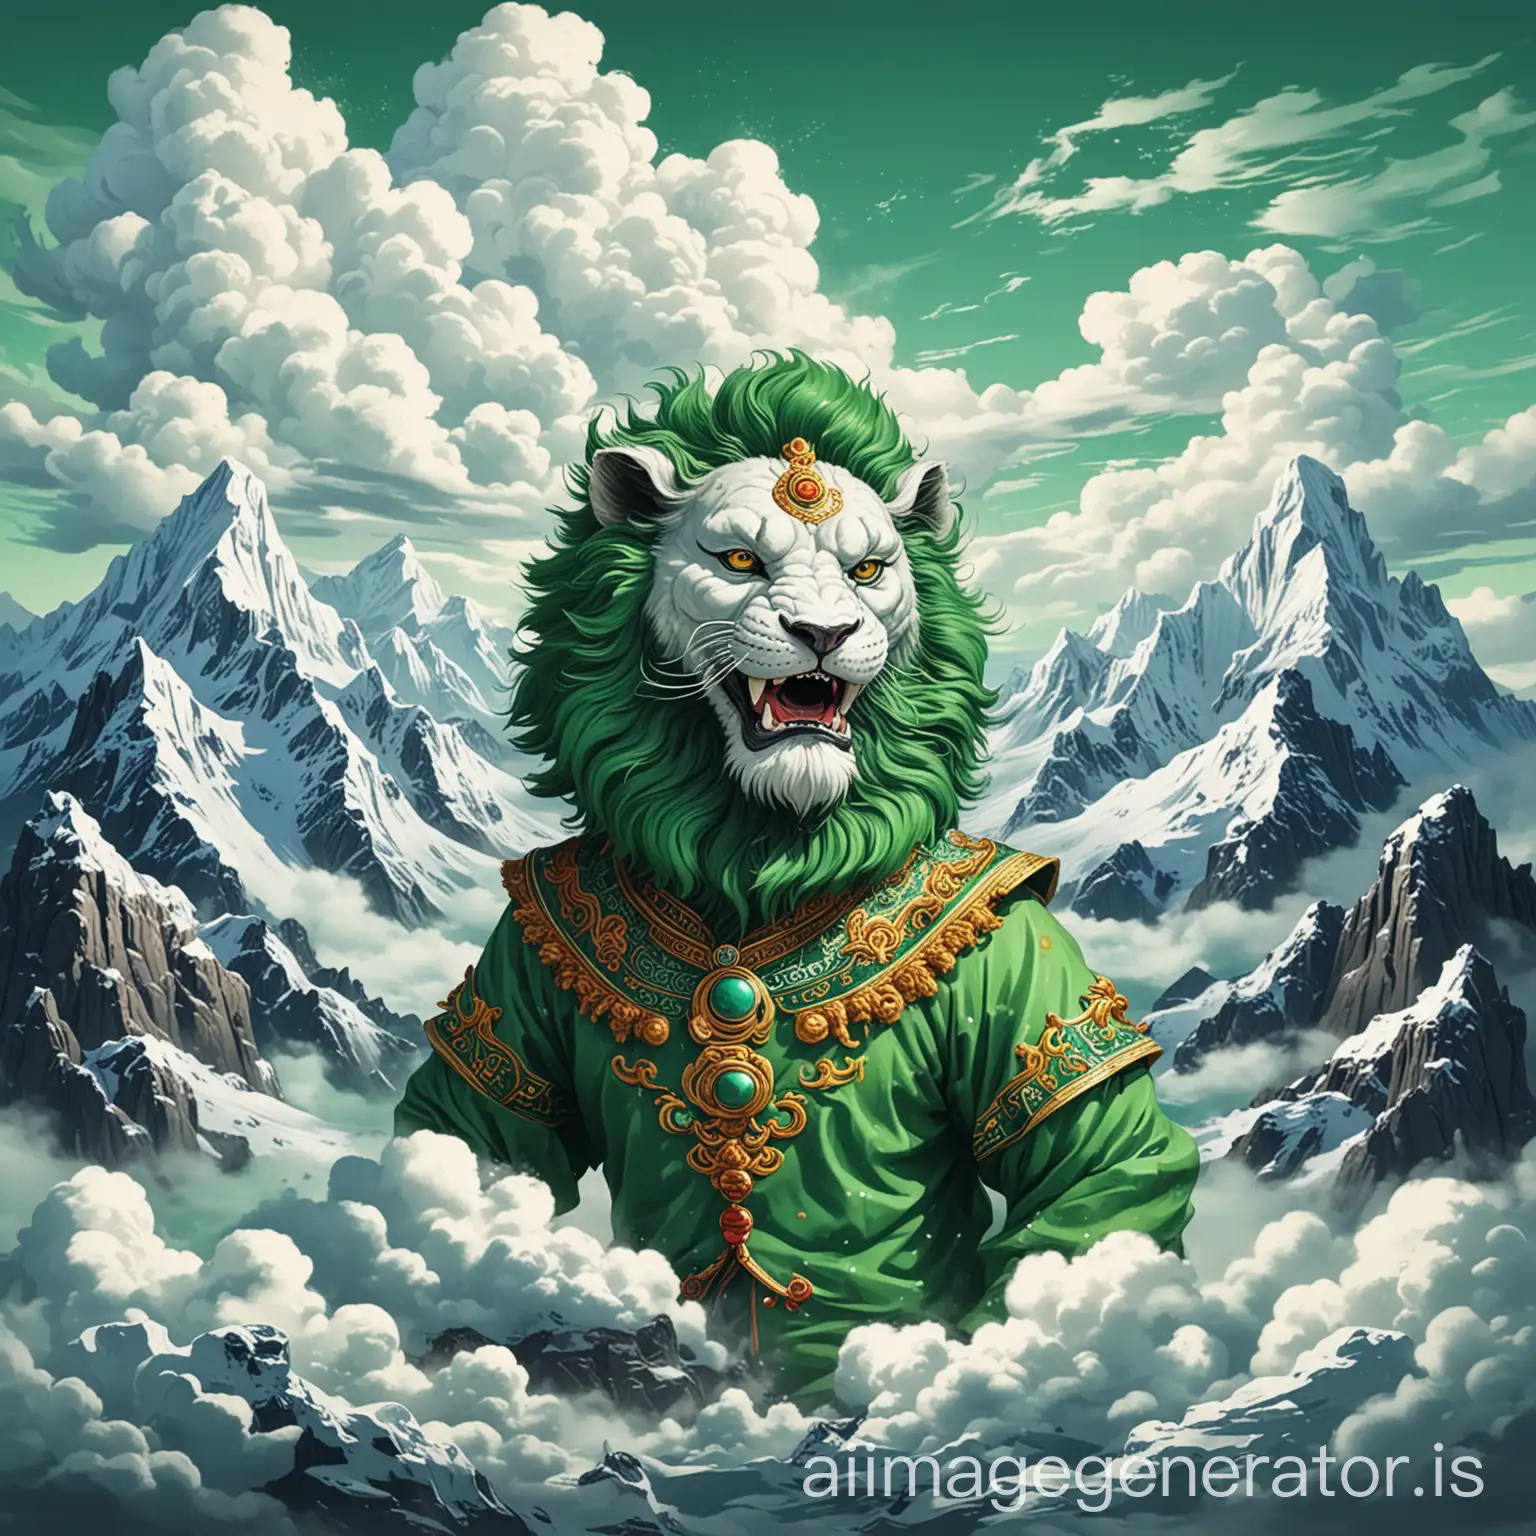 Abstract cartoon pop art design, Chinese dancing lion bust with green fur and white skin surrounded by clouds, side view, stylized t-shirt print, snowy mountains in background